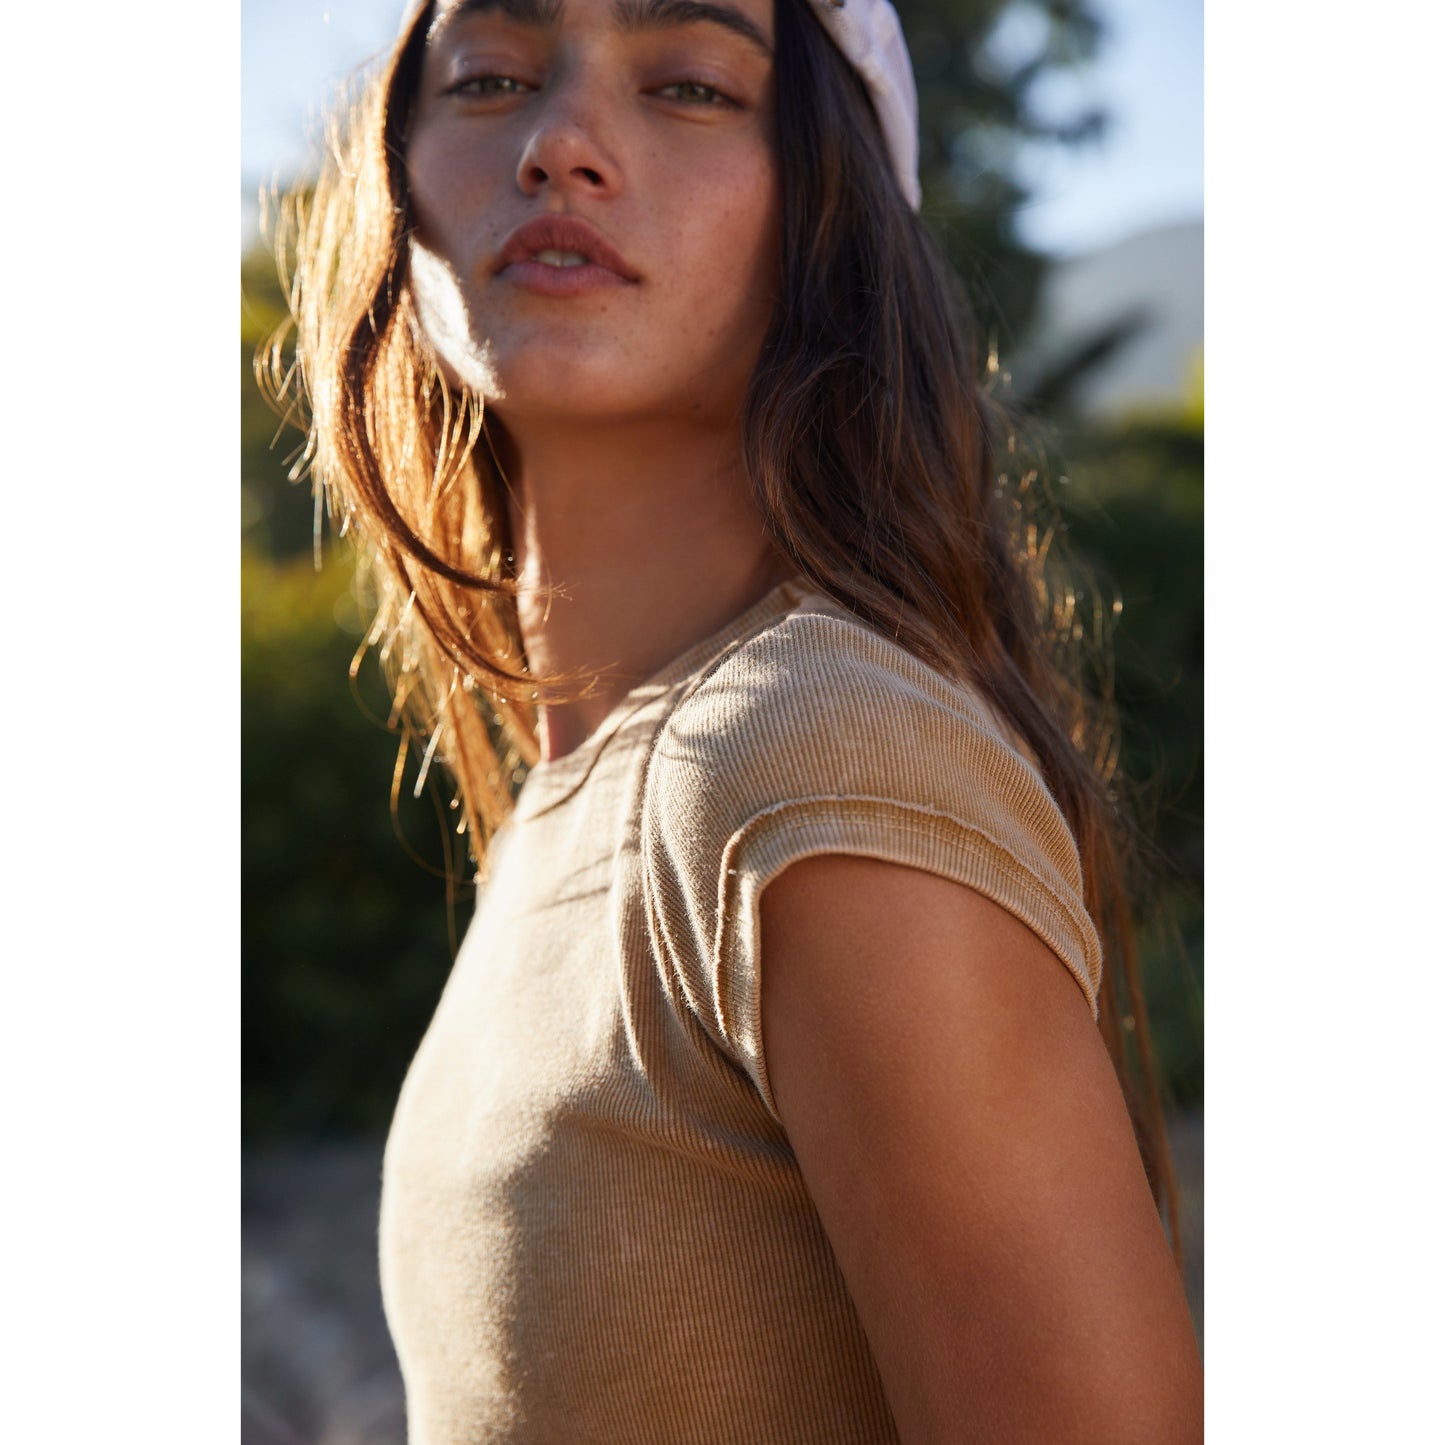 Close-up of a young woman in a Ribbed Baby Tee by Free People Movement, wearing a headband, with sunlight highlighting her hair and face.